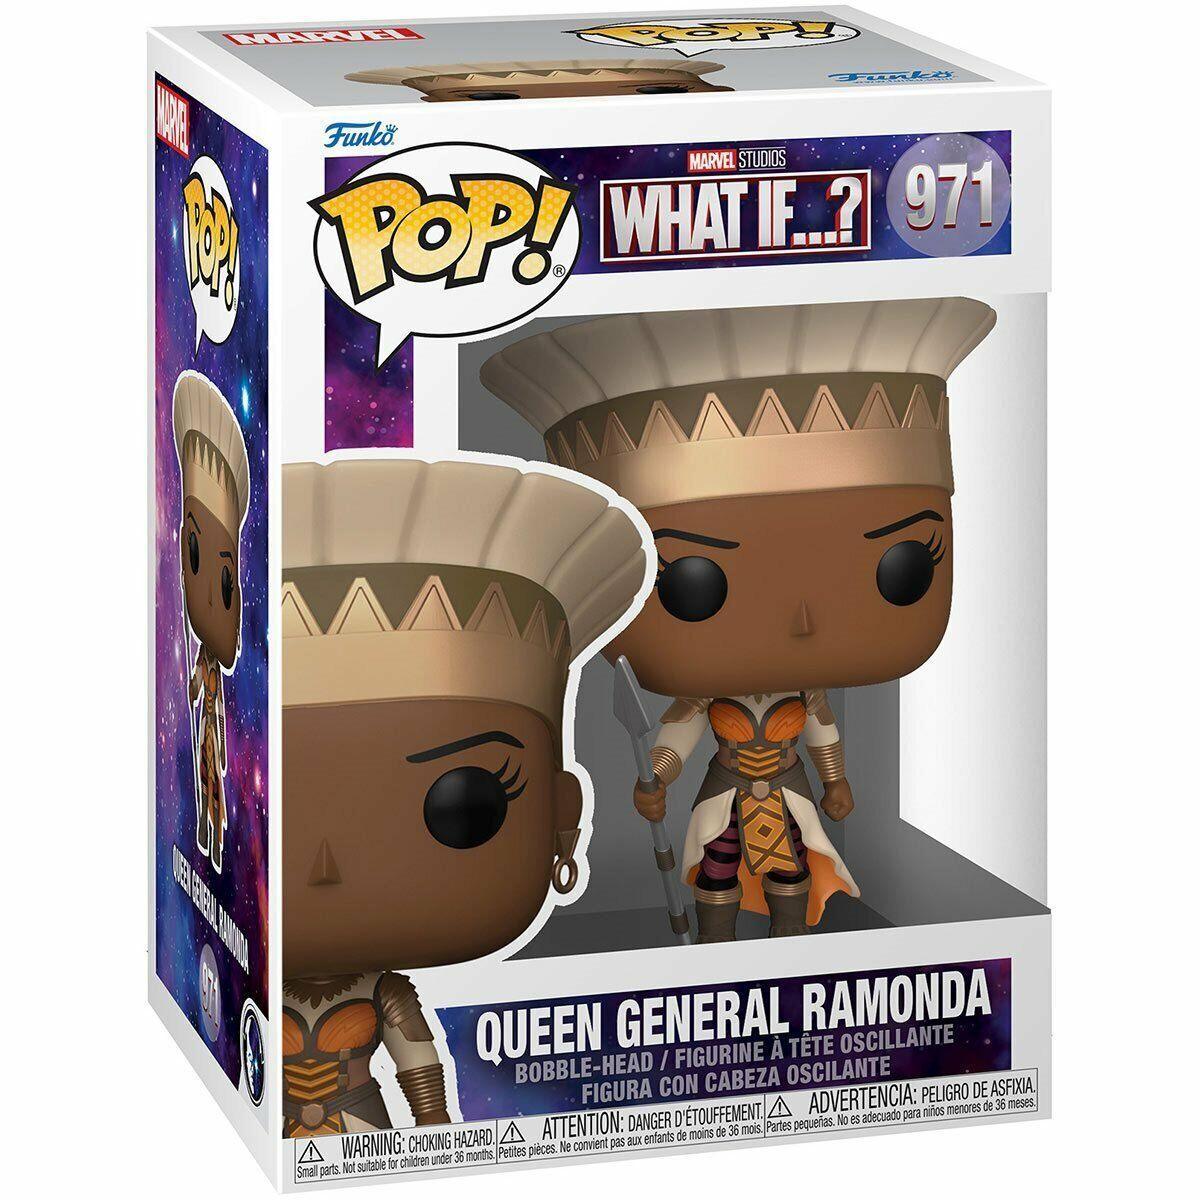 Funko POP Marvel: What If? - Queen General Ramonda - BumbleToys - 18+, 4+ Years, 5-7 Years, Action Figures, Boys, Funko, Girls, Marvel, Pre-Order